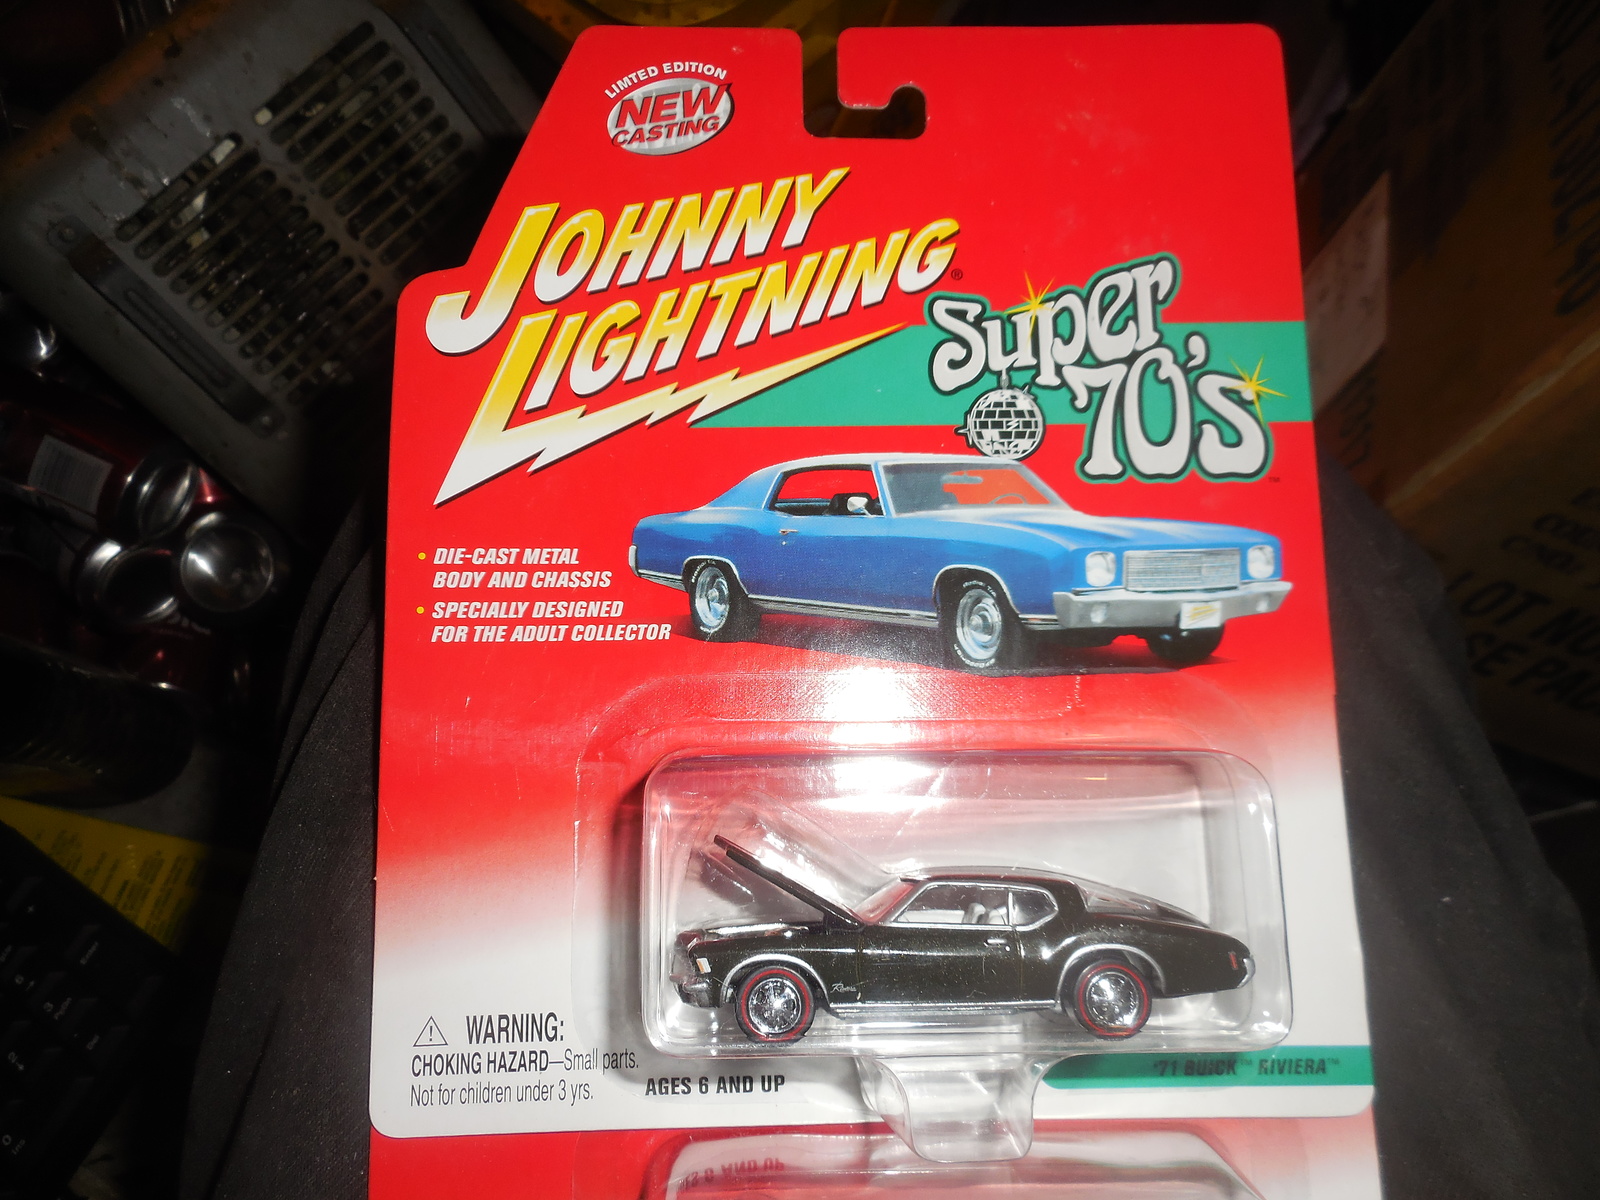 Primary image for    2002 Johnny Lightning Super 70's "77 Buick Rivera" Collector #992-01 Mint Car